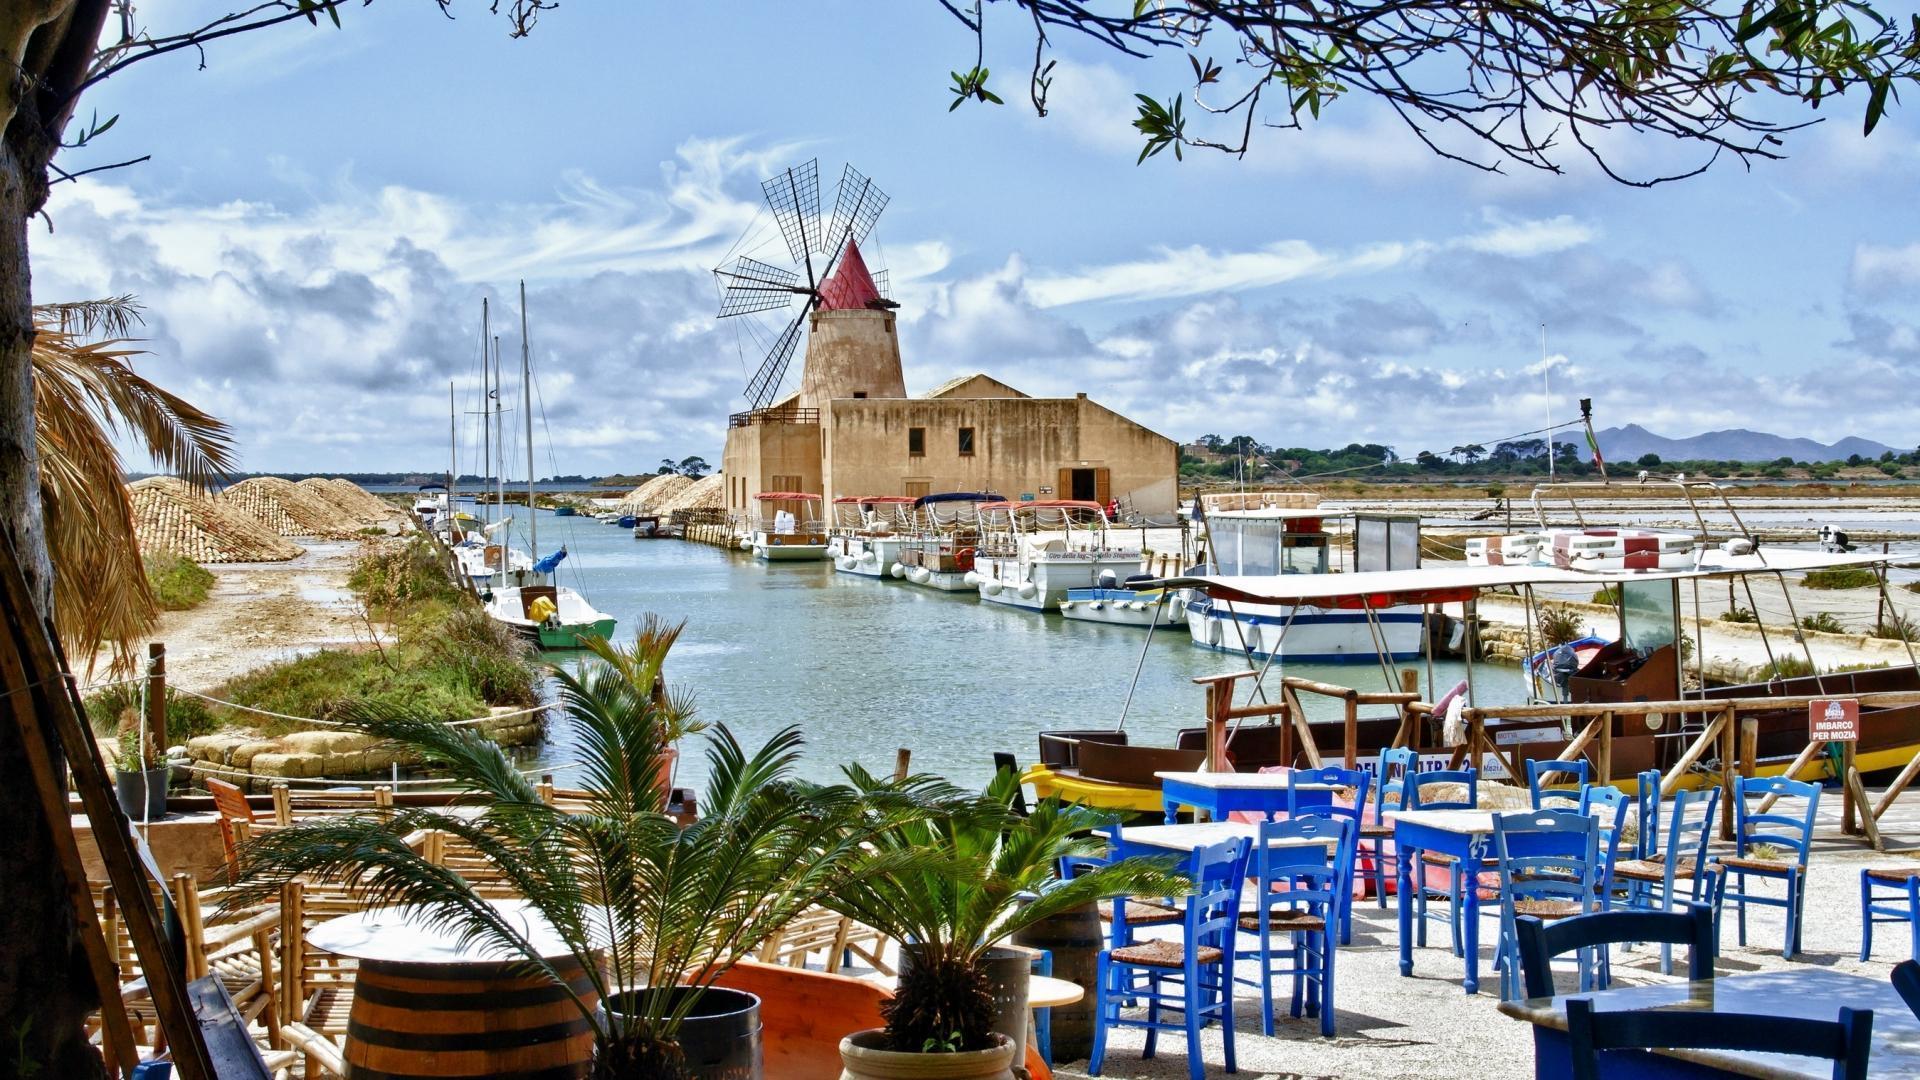 General 1920x1080 Sicily Marsala Italy windmill palm trees table chair sea landscape